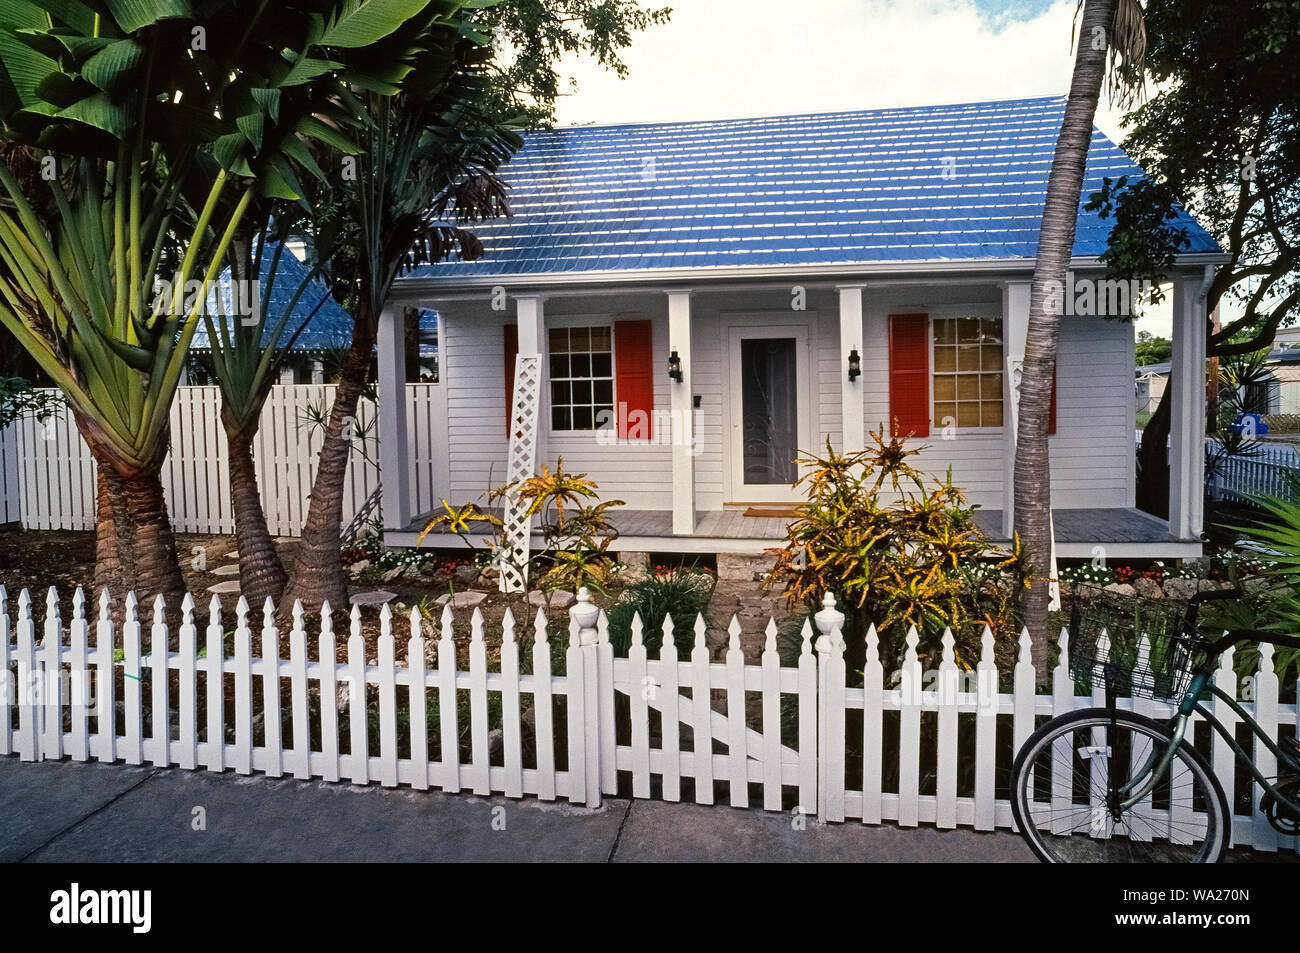 Famous American playwright Tennessee Williams lived for 34 years in this modest 1933 home on Duncan Street in Key West, Florida, USA. Before his death in 1983 at age 71, Williams wrote 'The Glass Menagerie,' 'A Streetcar Named Desire,' 'Cat on a Hot Tin Roof' and other stage classics that also became major motion pictures. The house is privately owned and not open to the public, but visitors to the Florida Keys can learn more about the playwright's life at the Tennessee Williams Museum in an 1884 bungalow at 513 Truman Avenue in Key West. Stock Photo